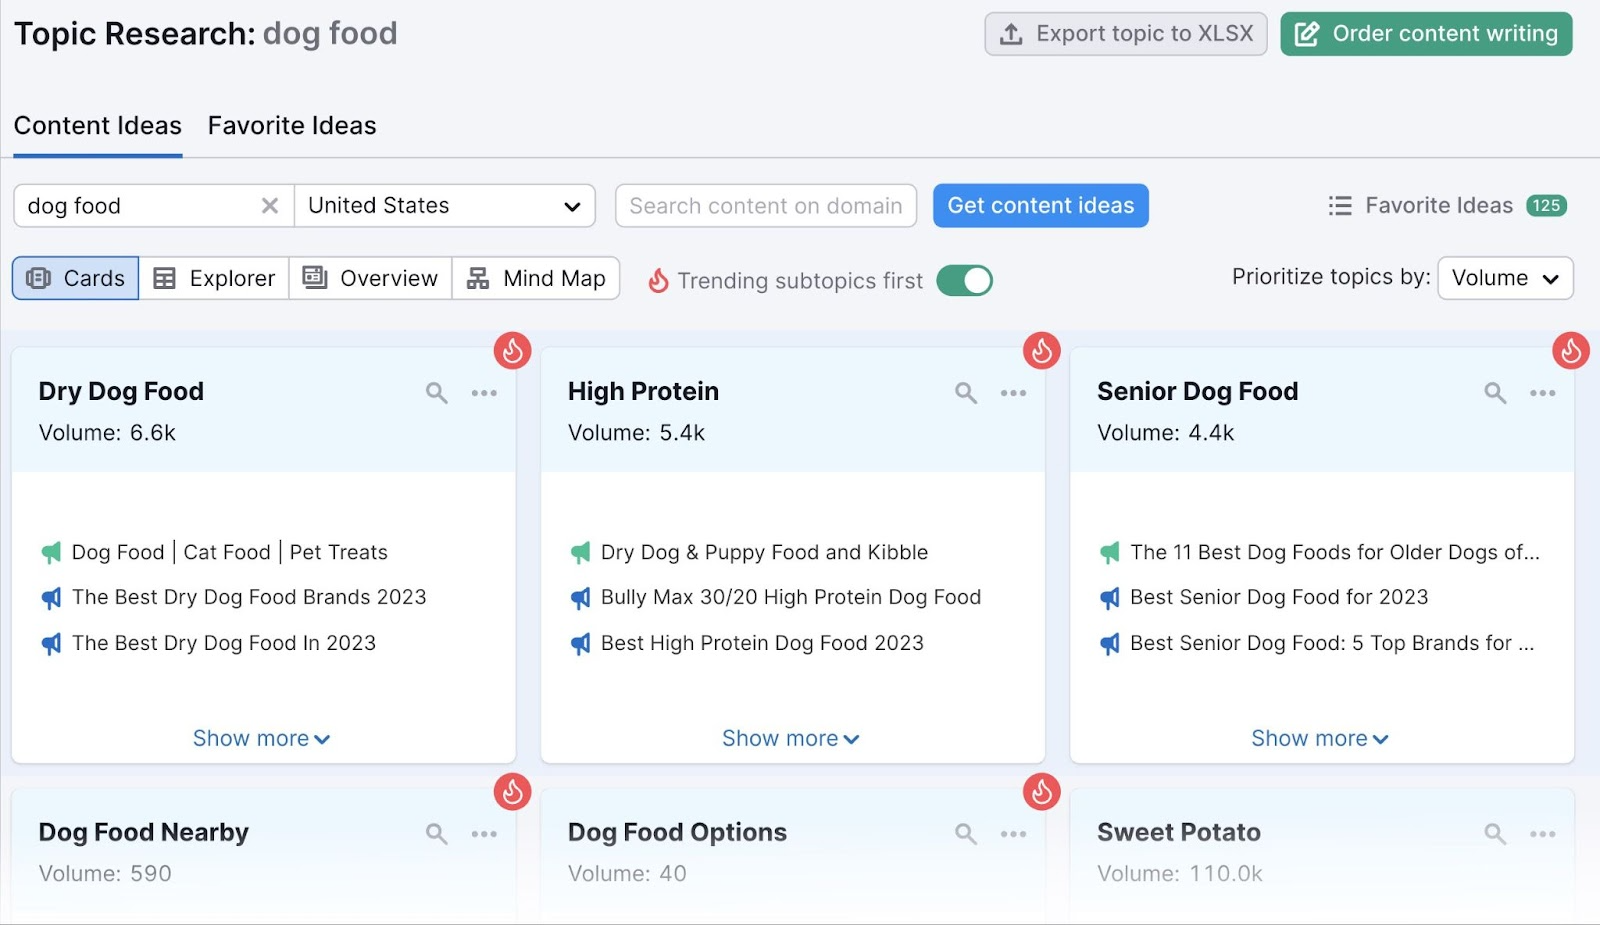 "content ideas" tab displayed for "dog food" seek